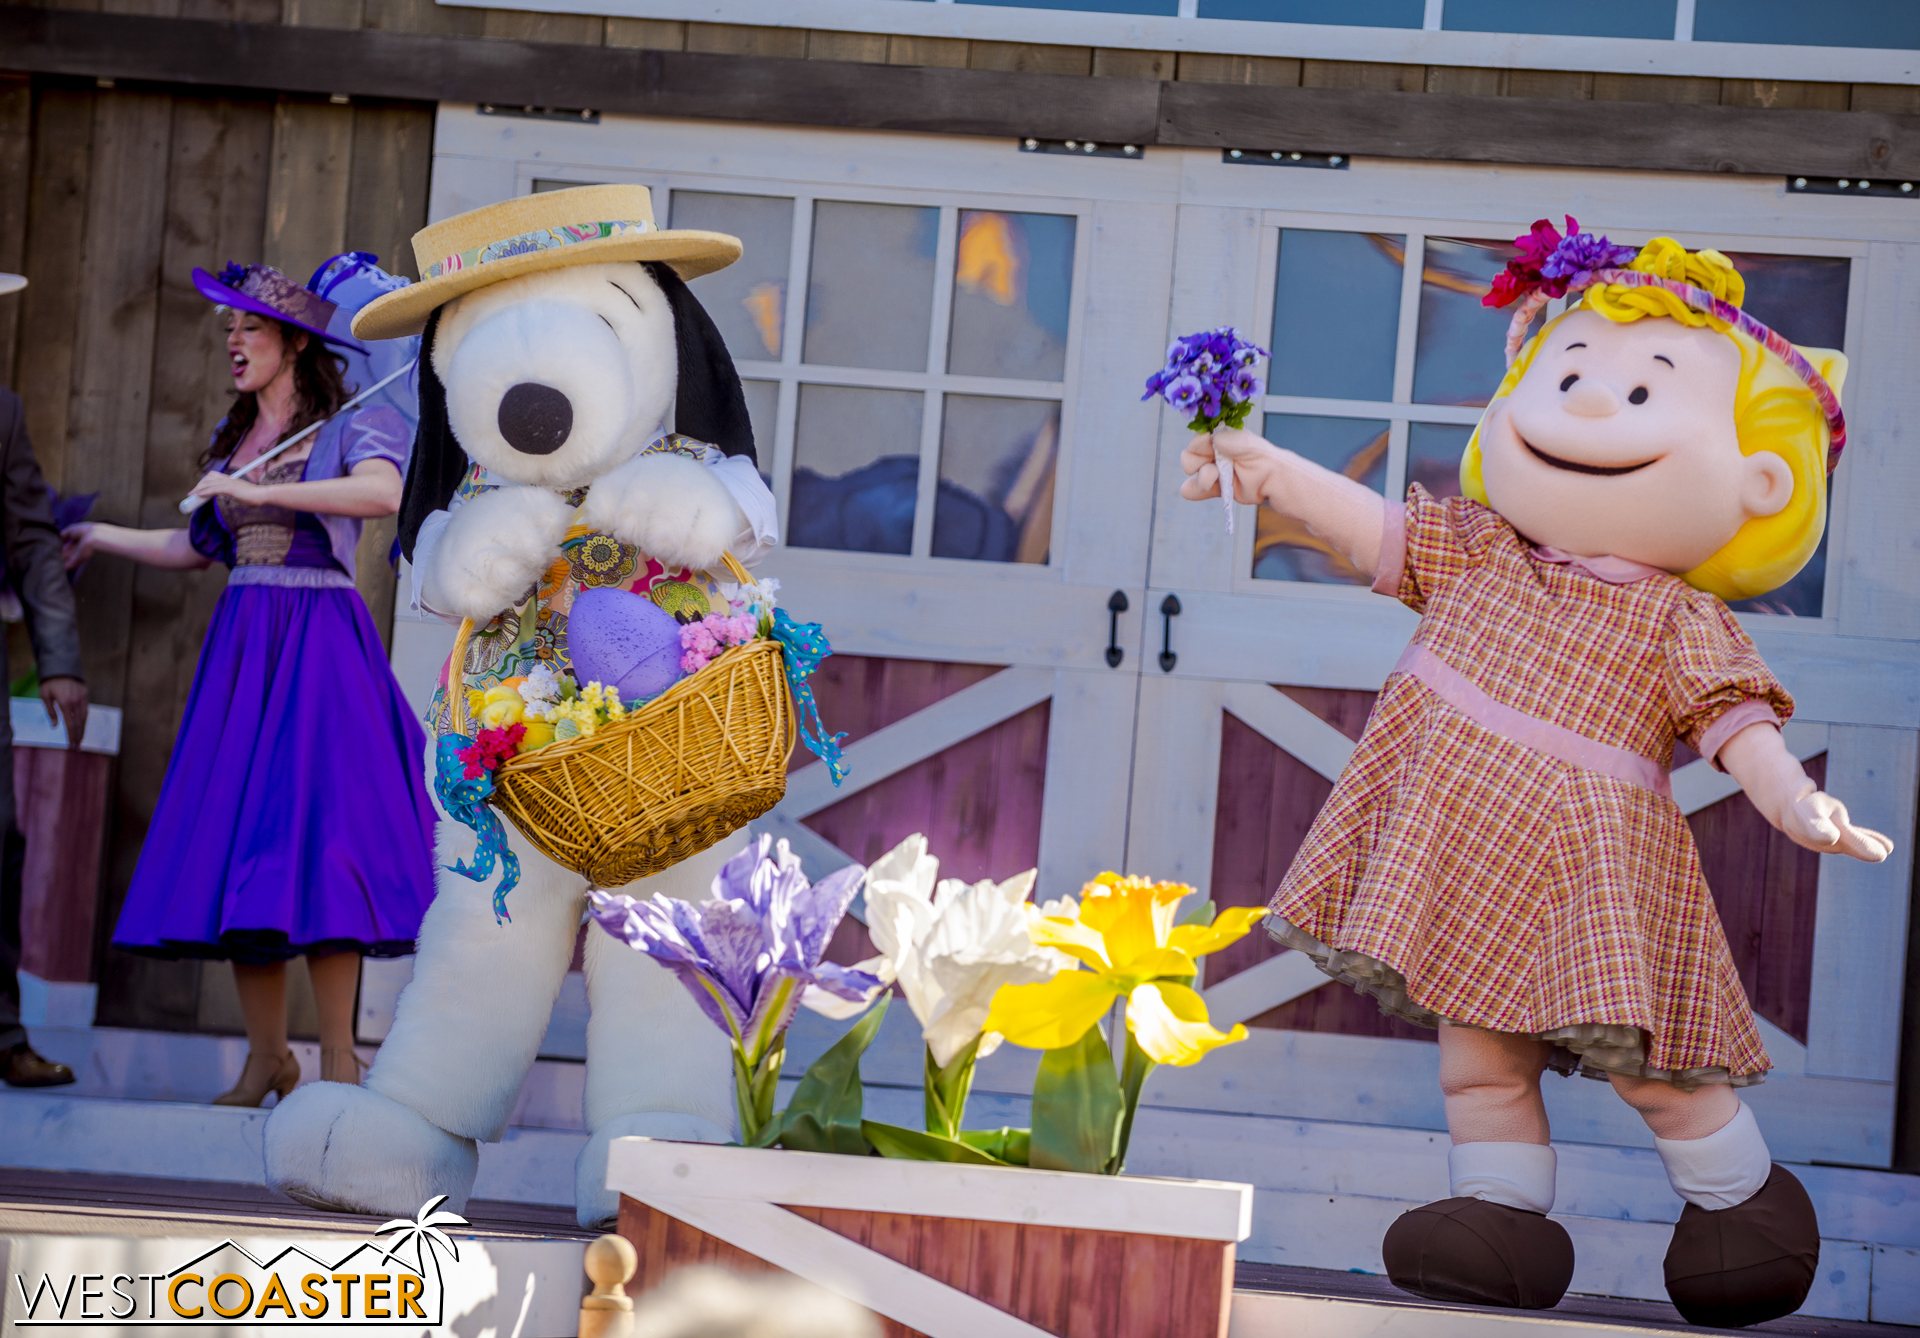  Snoopy plays nice and gives Sally a bouquet. 